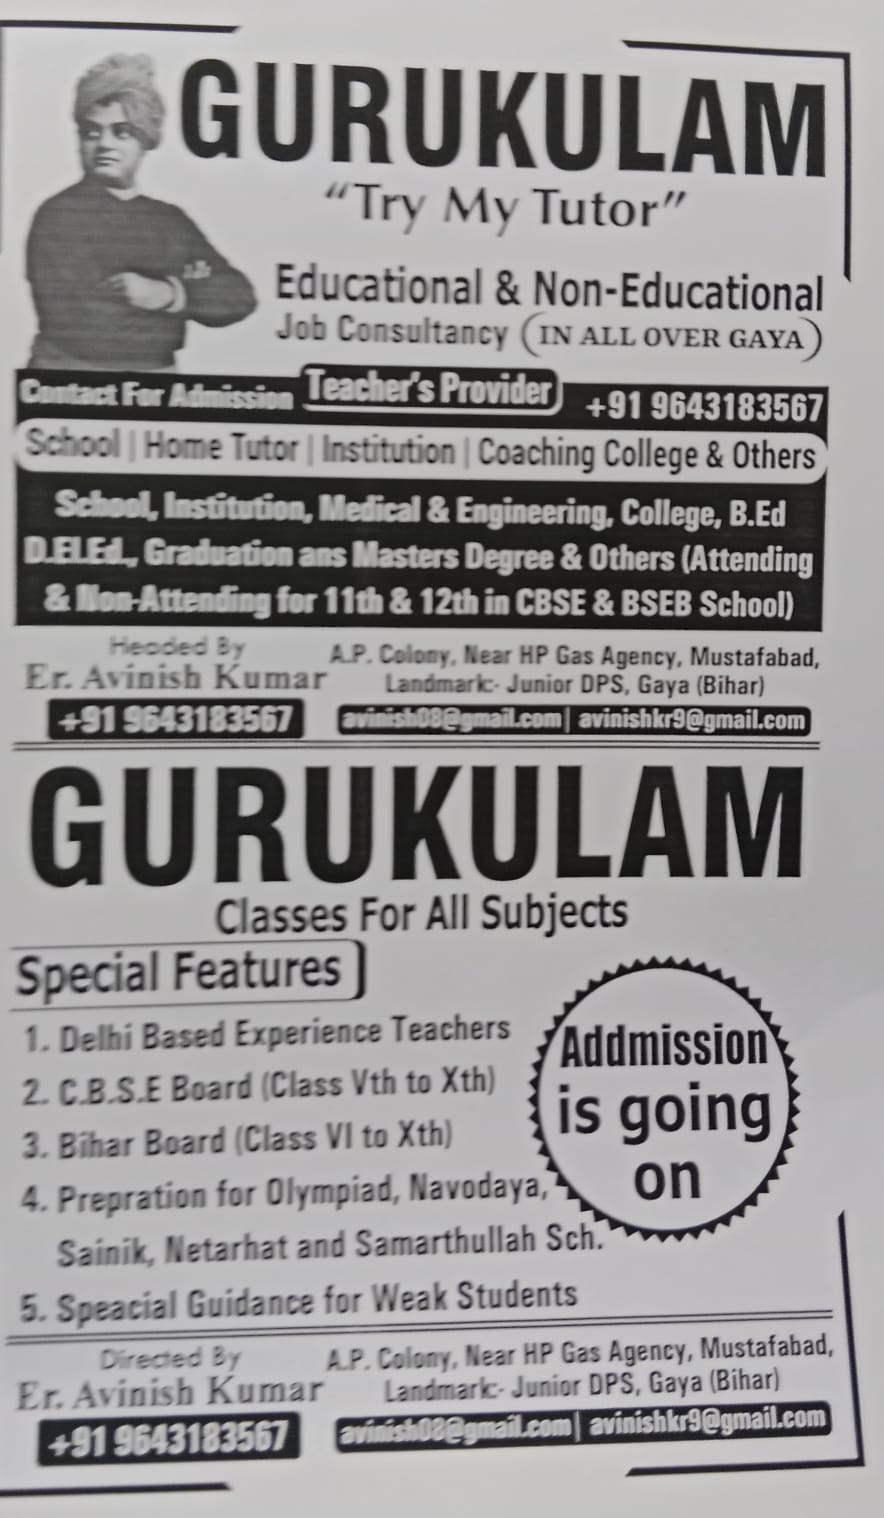 ALL TYPES OF SCHOOL AND HOME TEACHER CONSULTANT IN GAYA